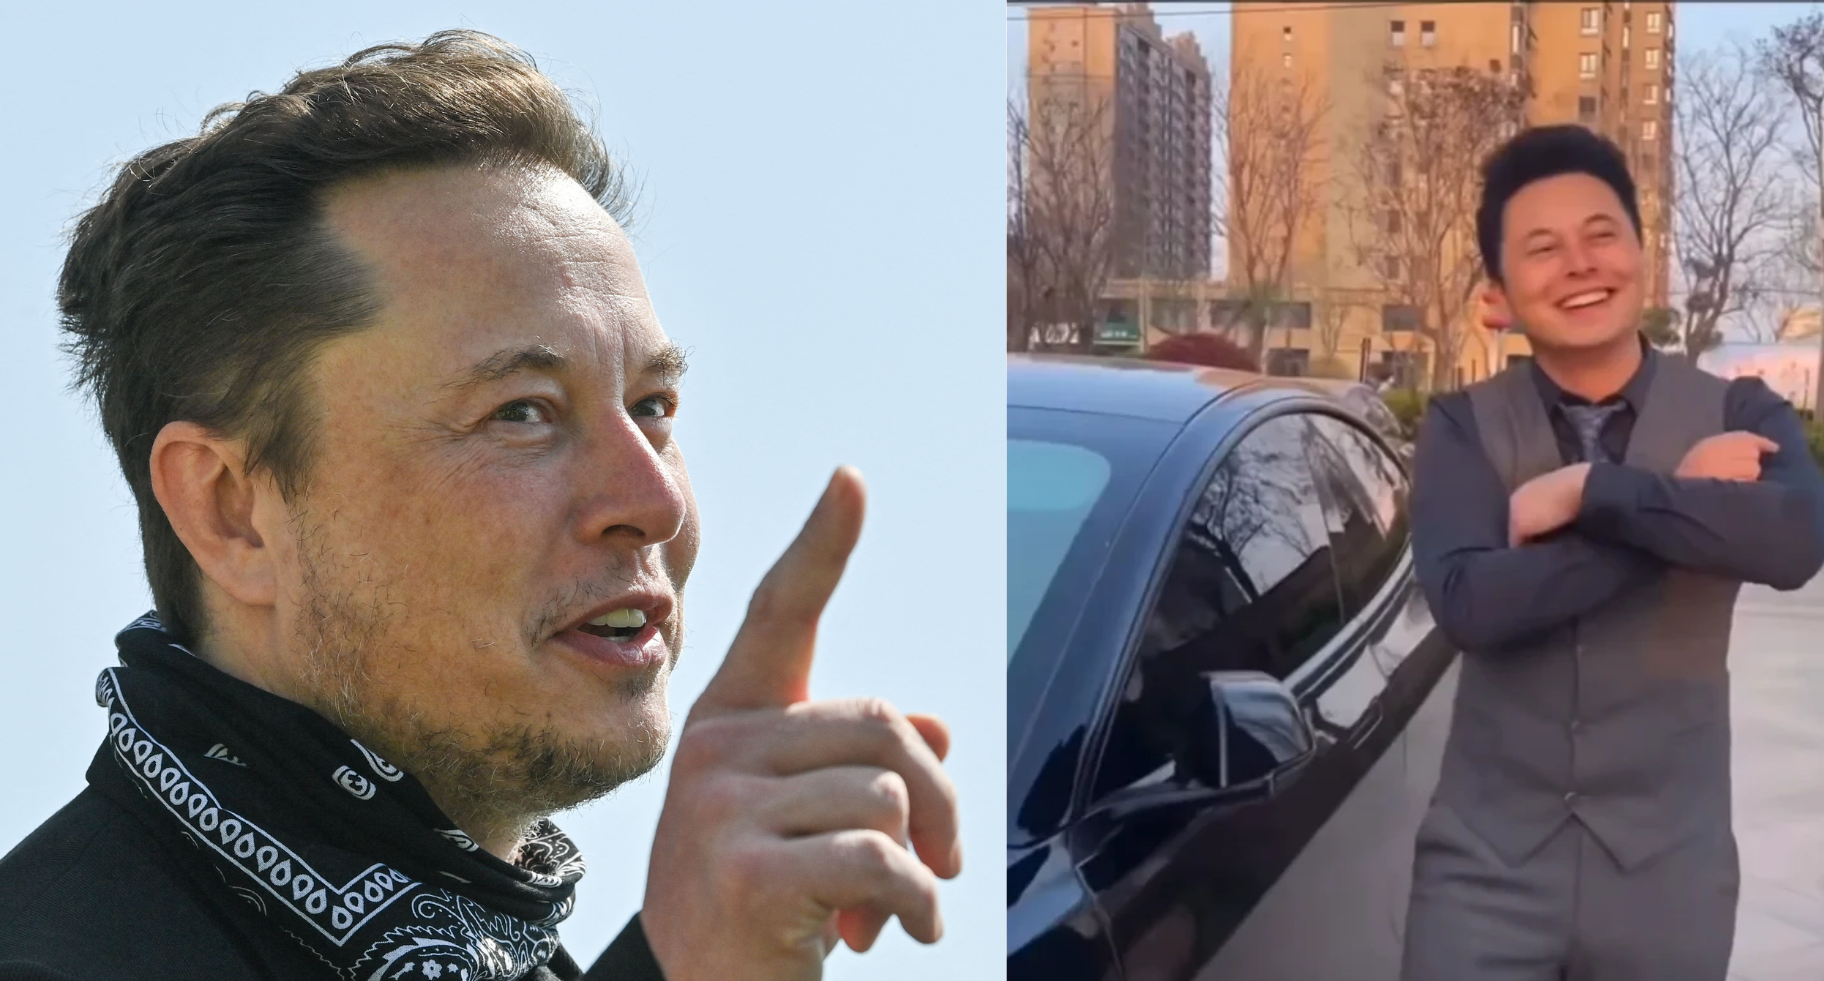 Some say, he’s the AliExpress version of Elon Musk